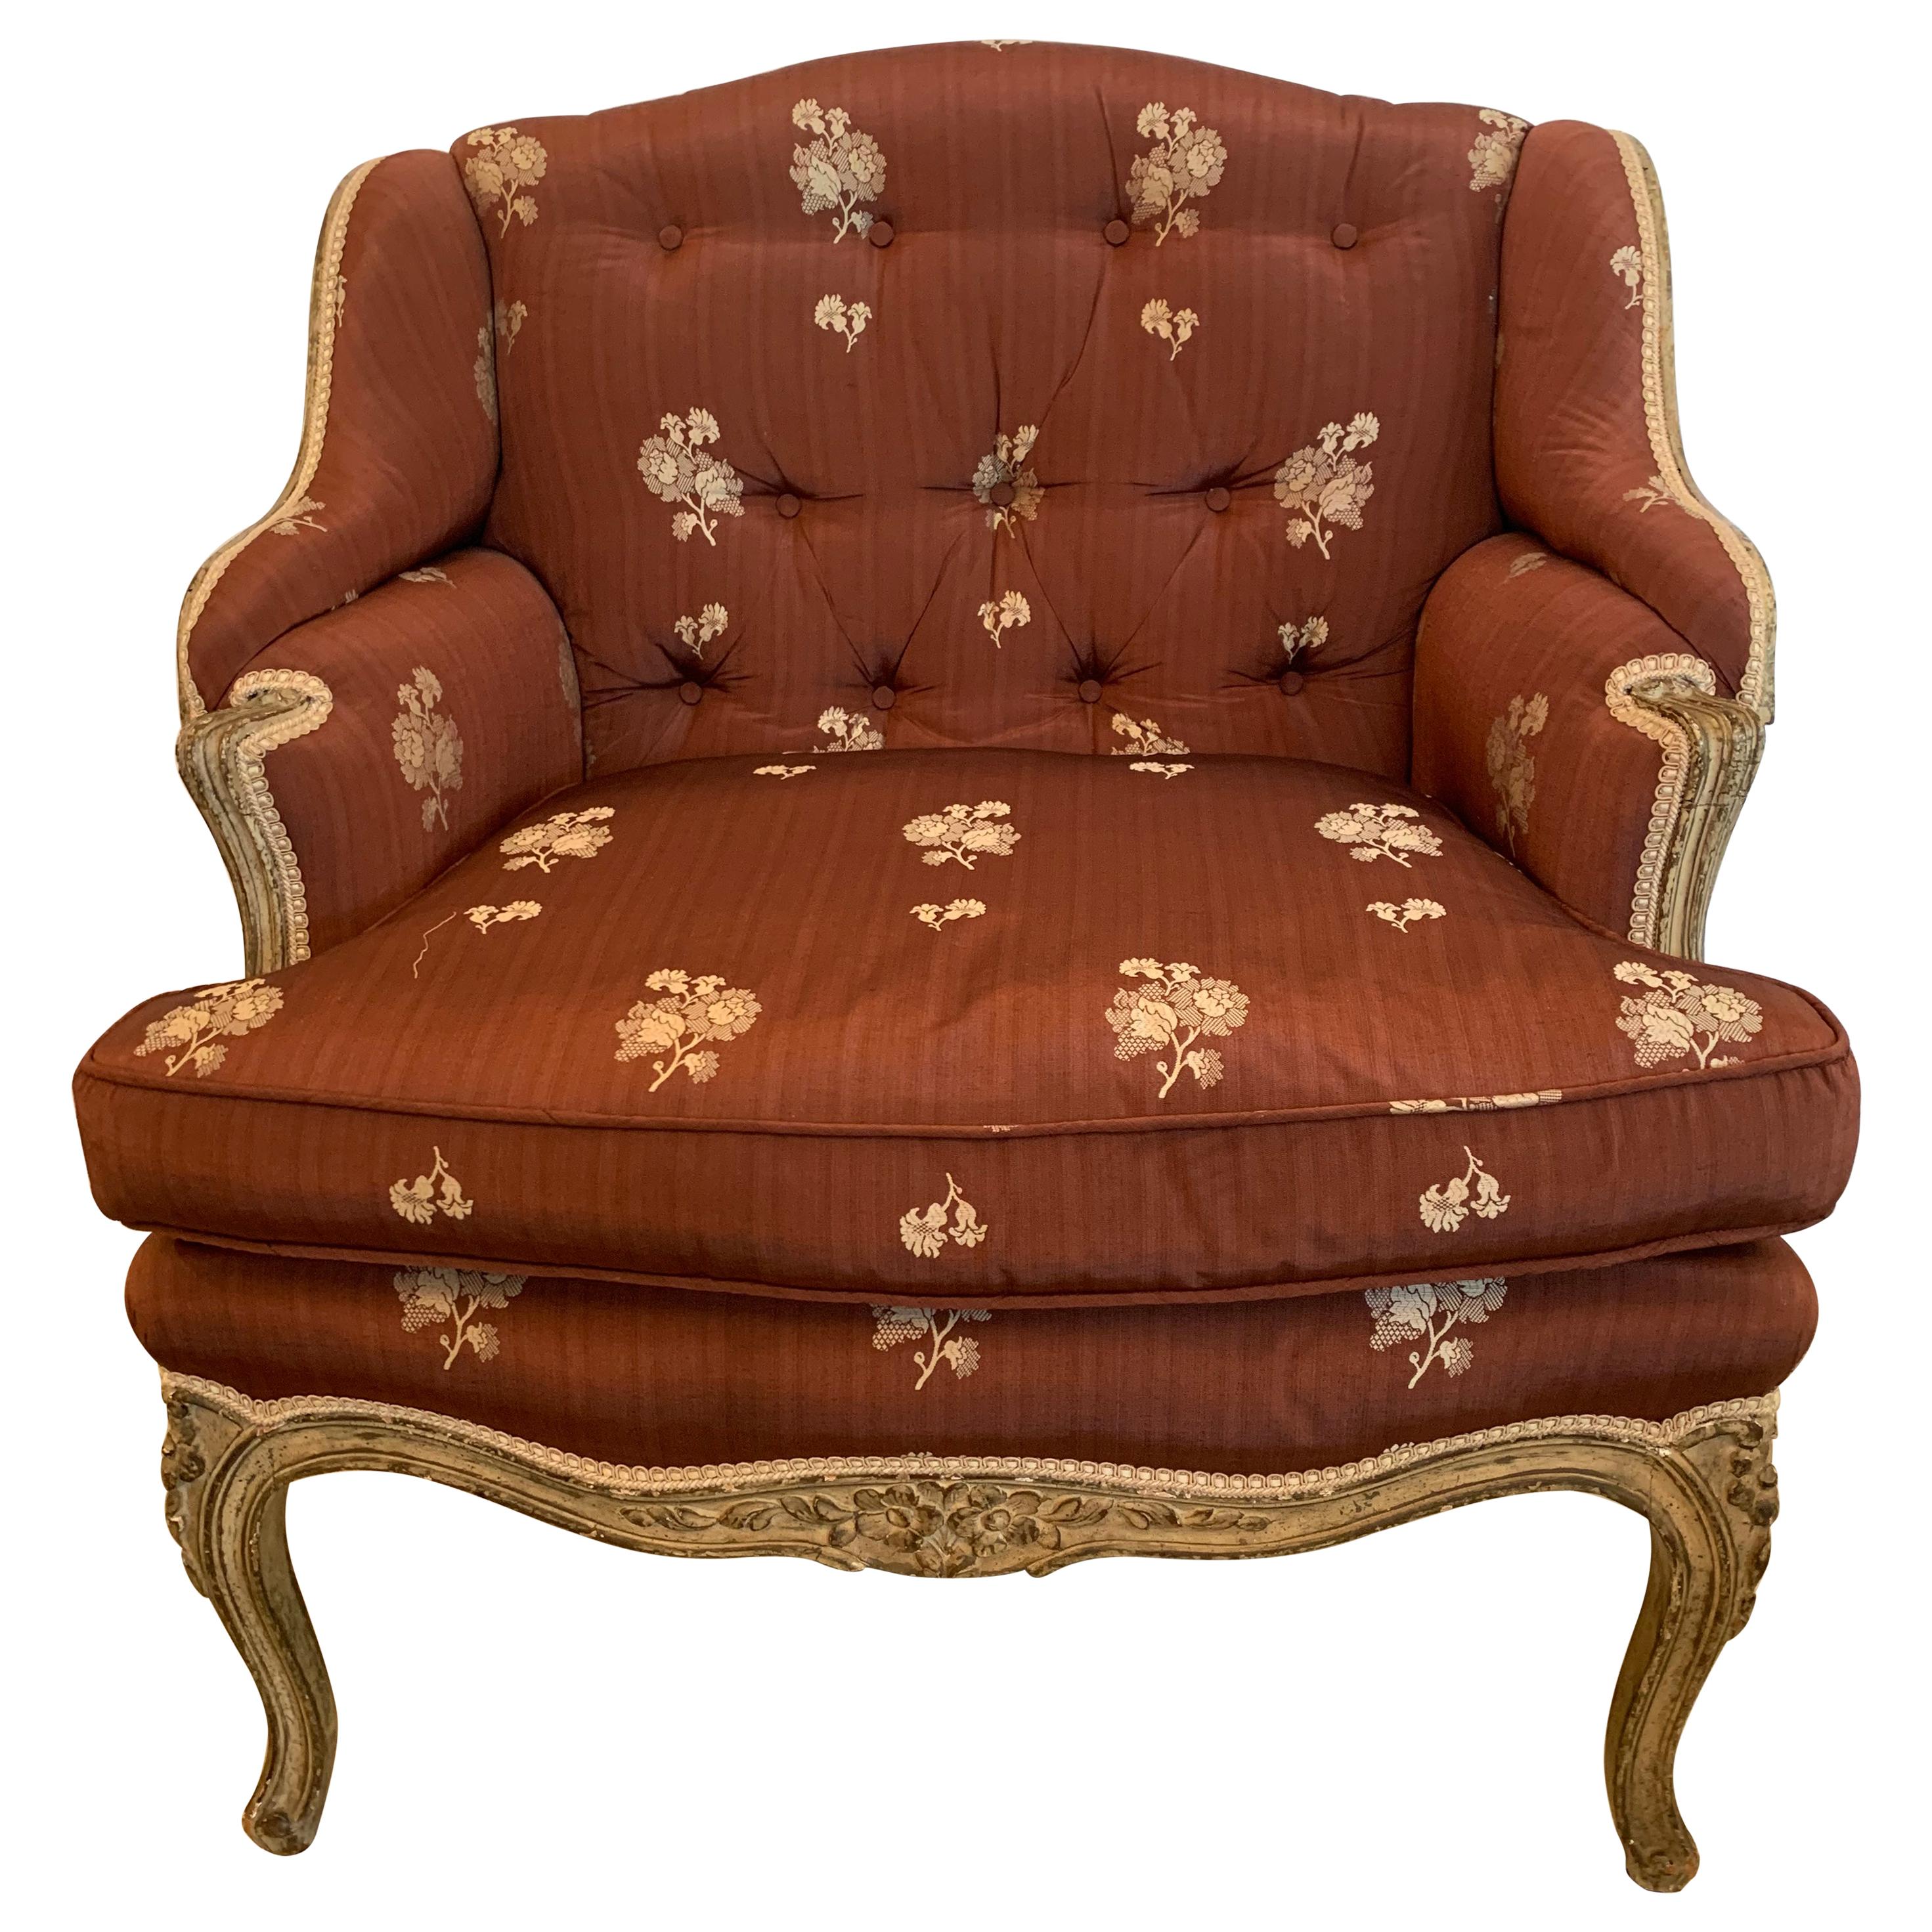 Gorgeous French Louis XV Club Chair Dressed Up in Rose Tarlow Fabric